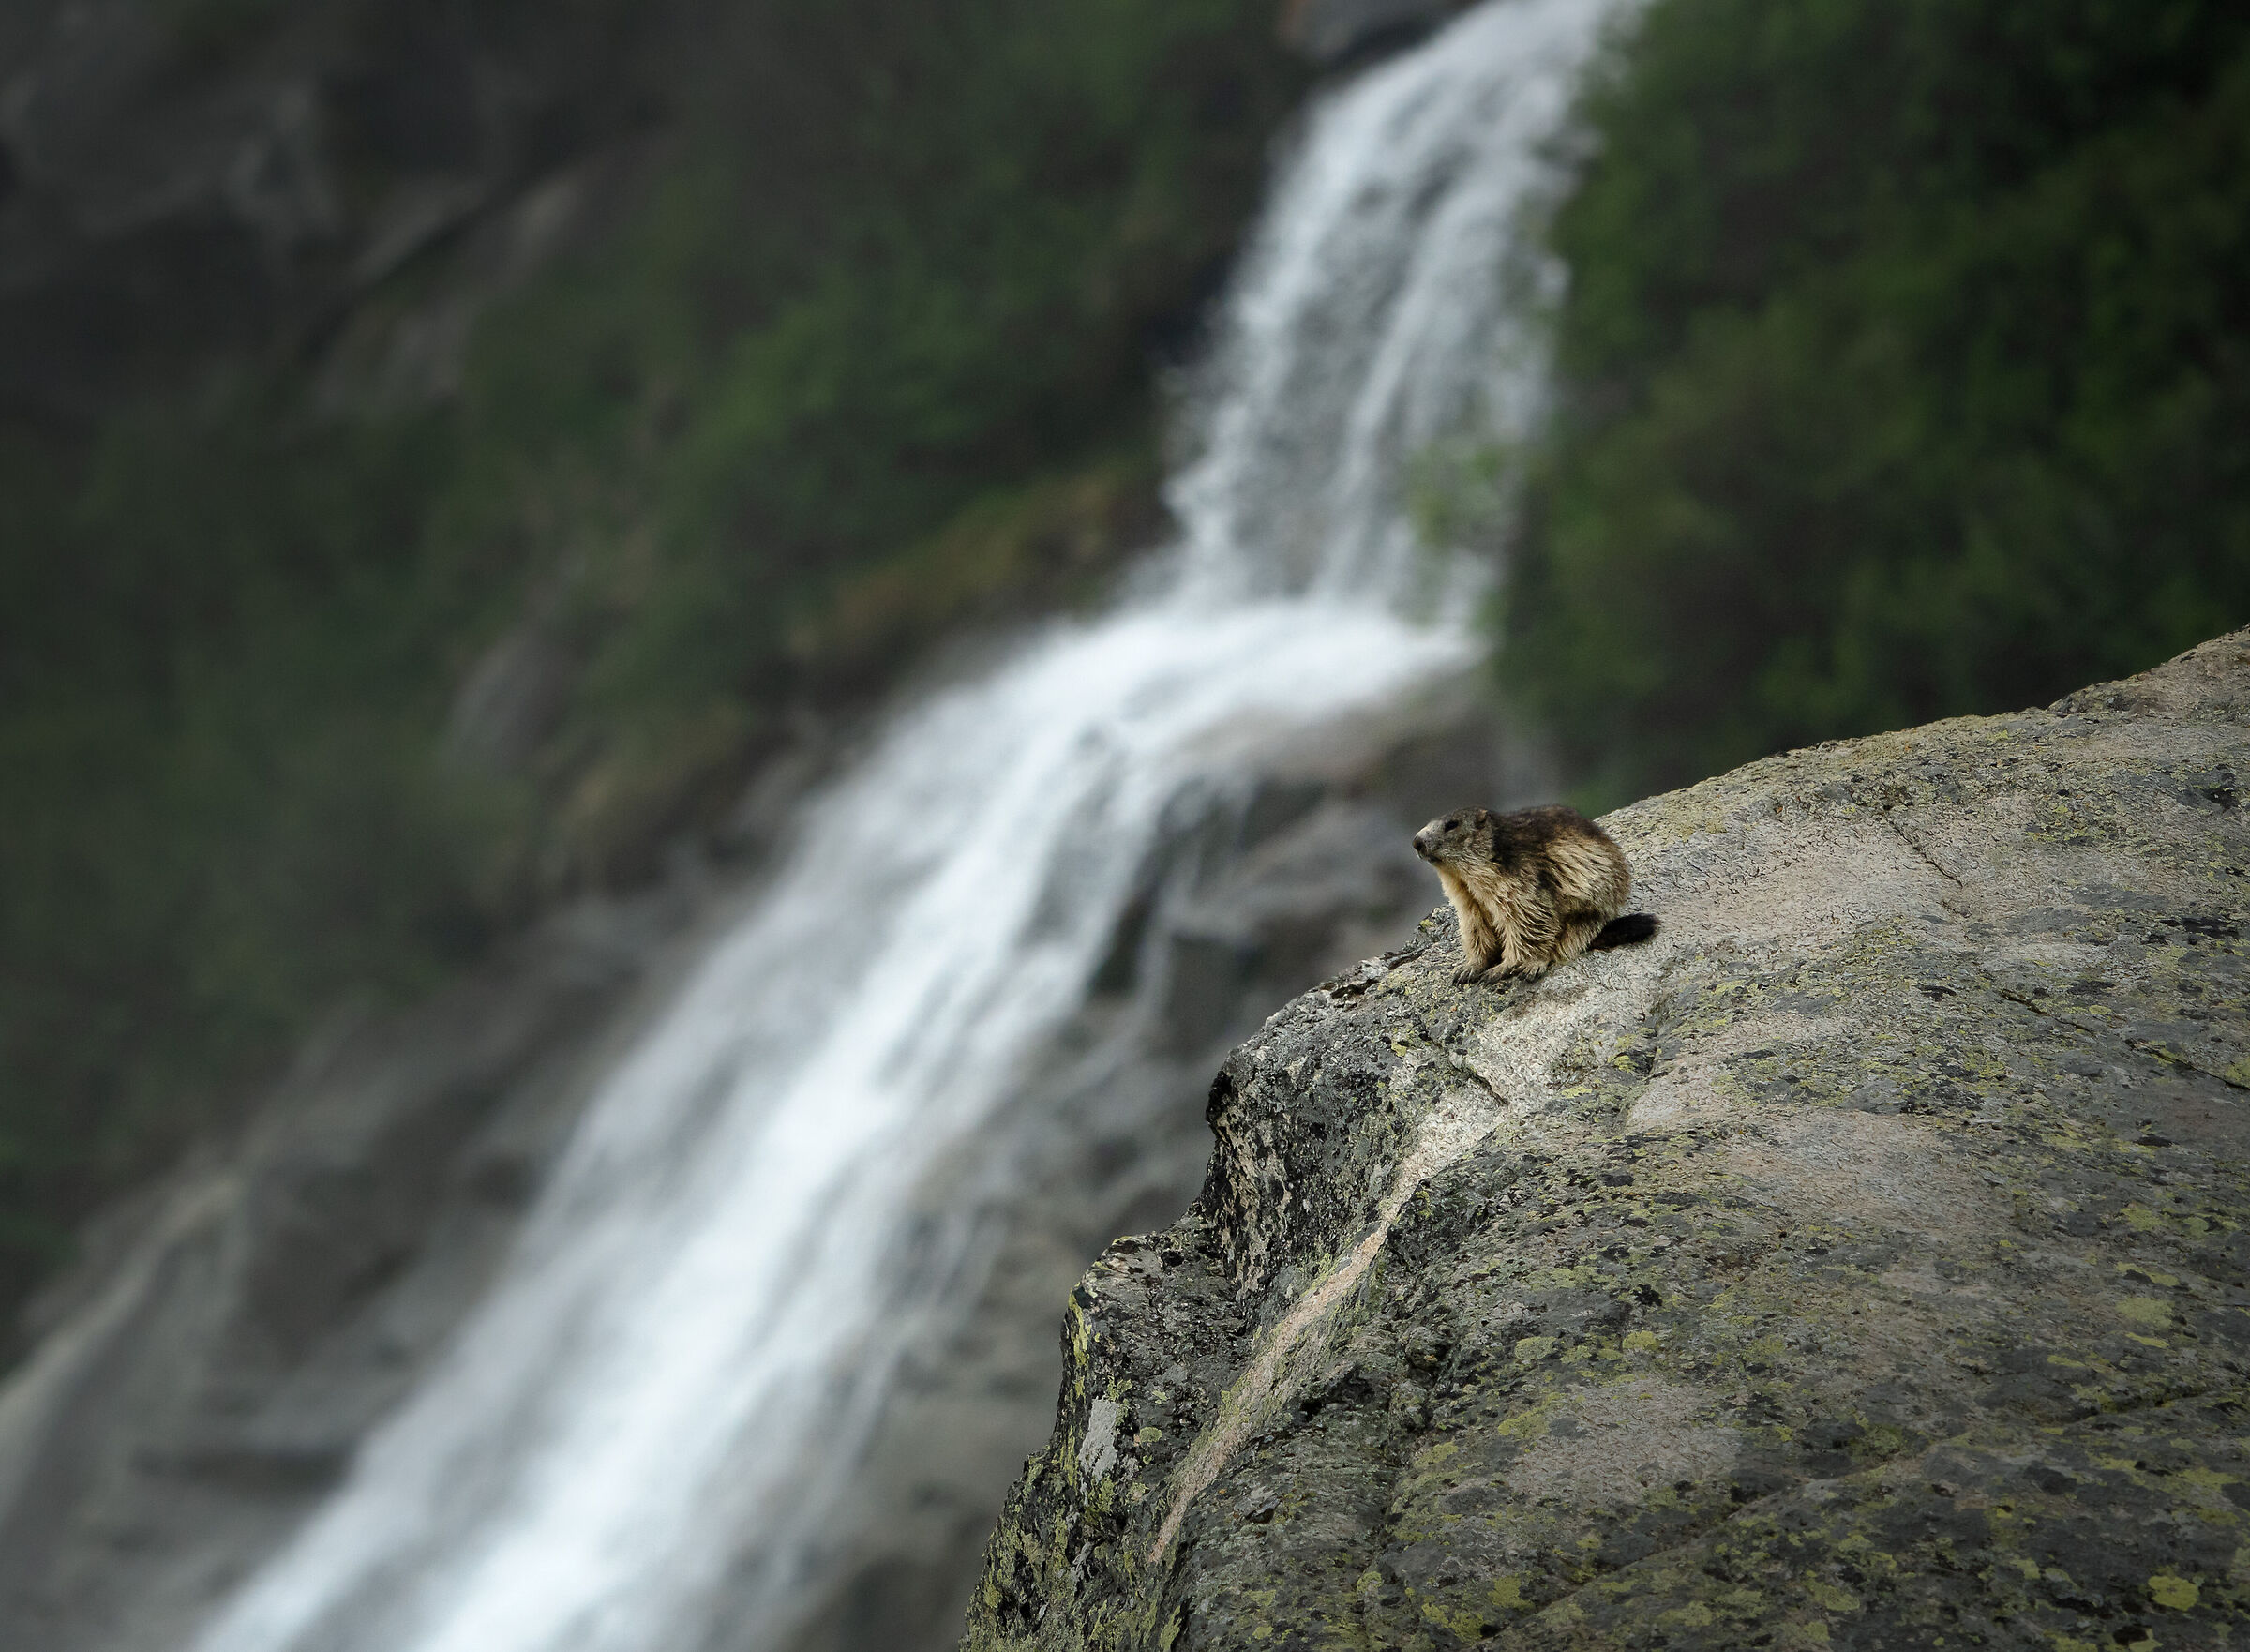 The marmot and waterfall...